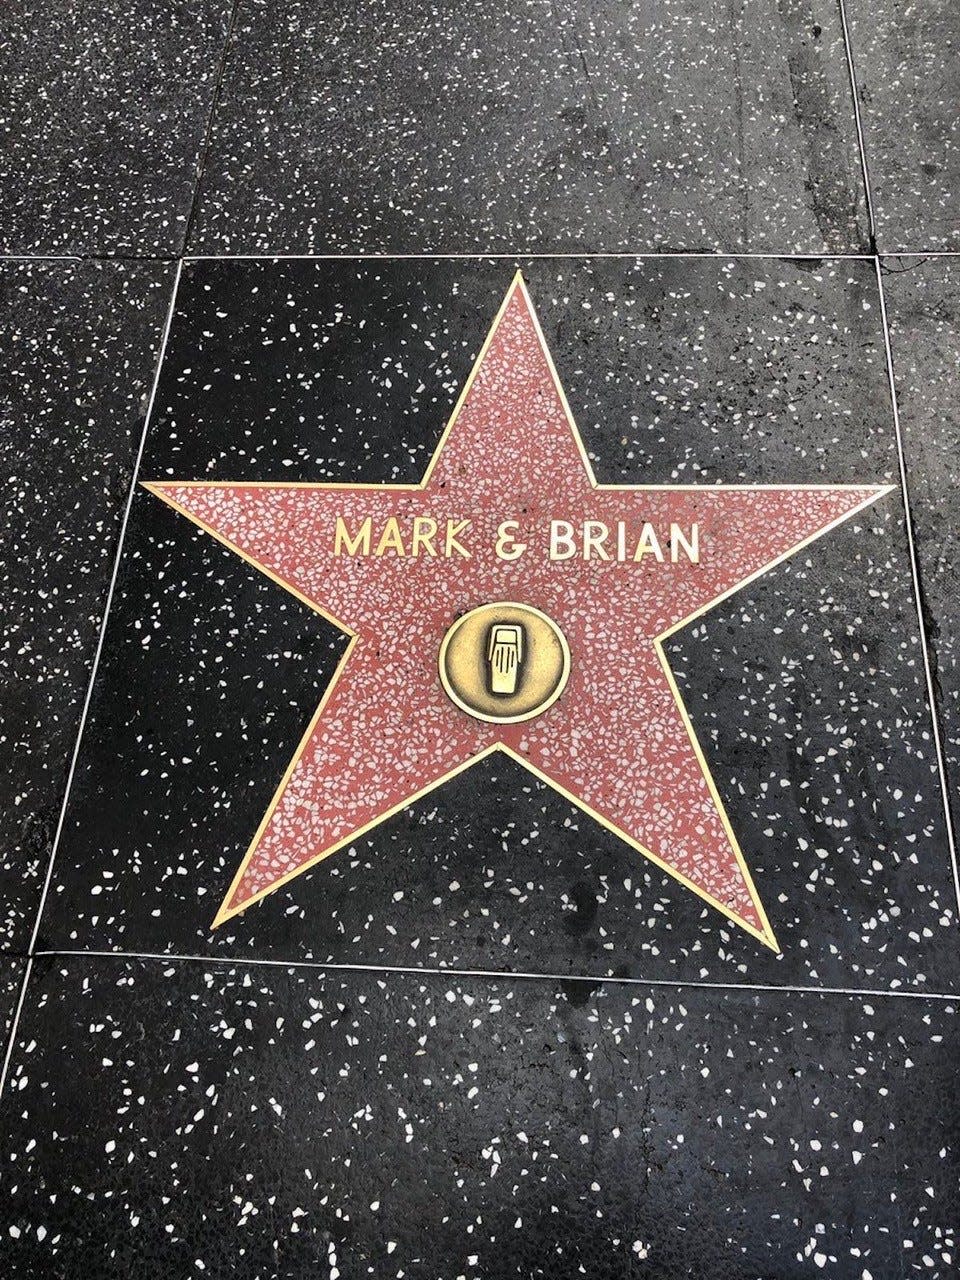 Mark Thompson and Brian Phelps received a star on the Hollywood Walk of Fame in 1997.